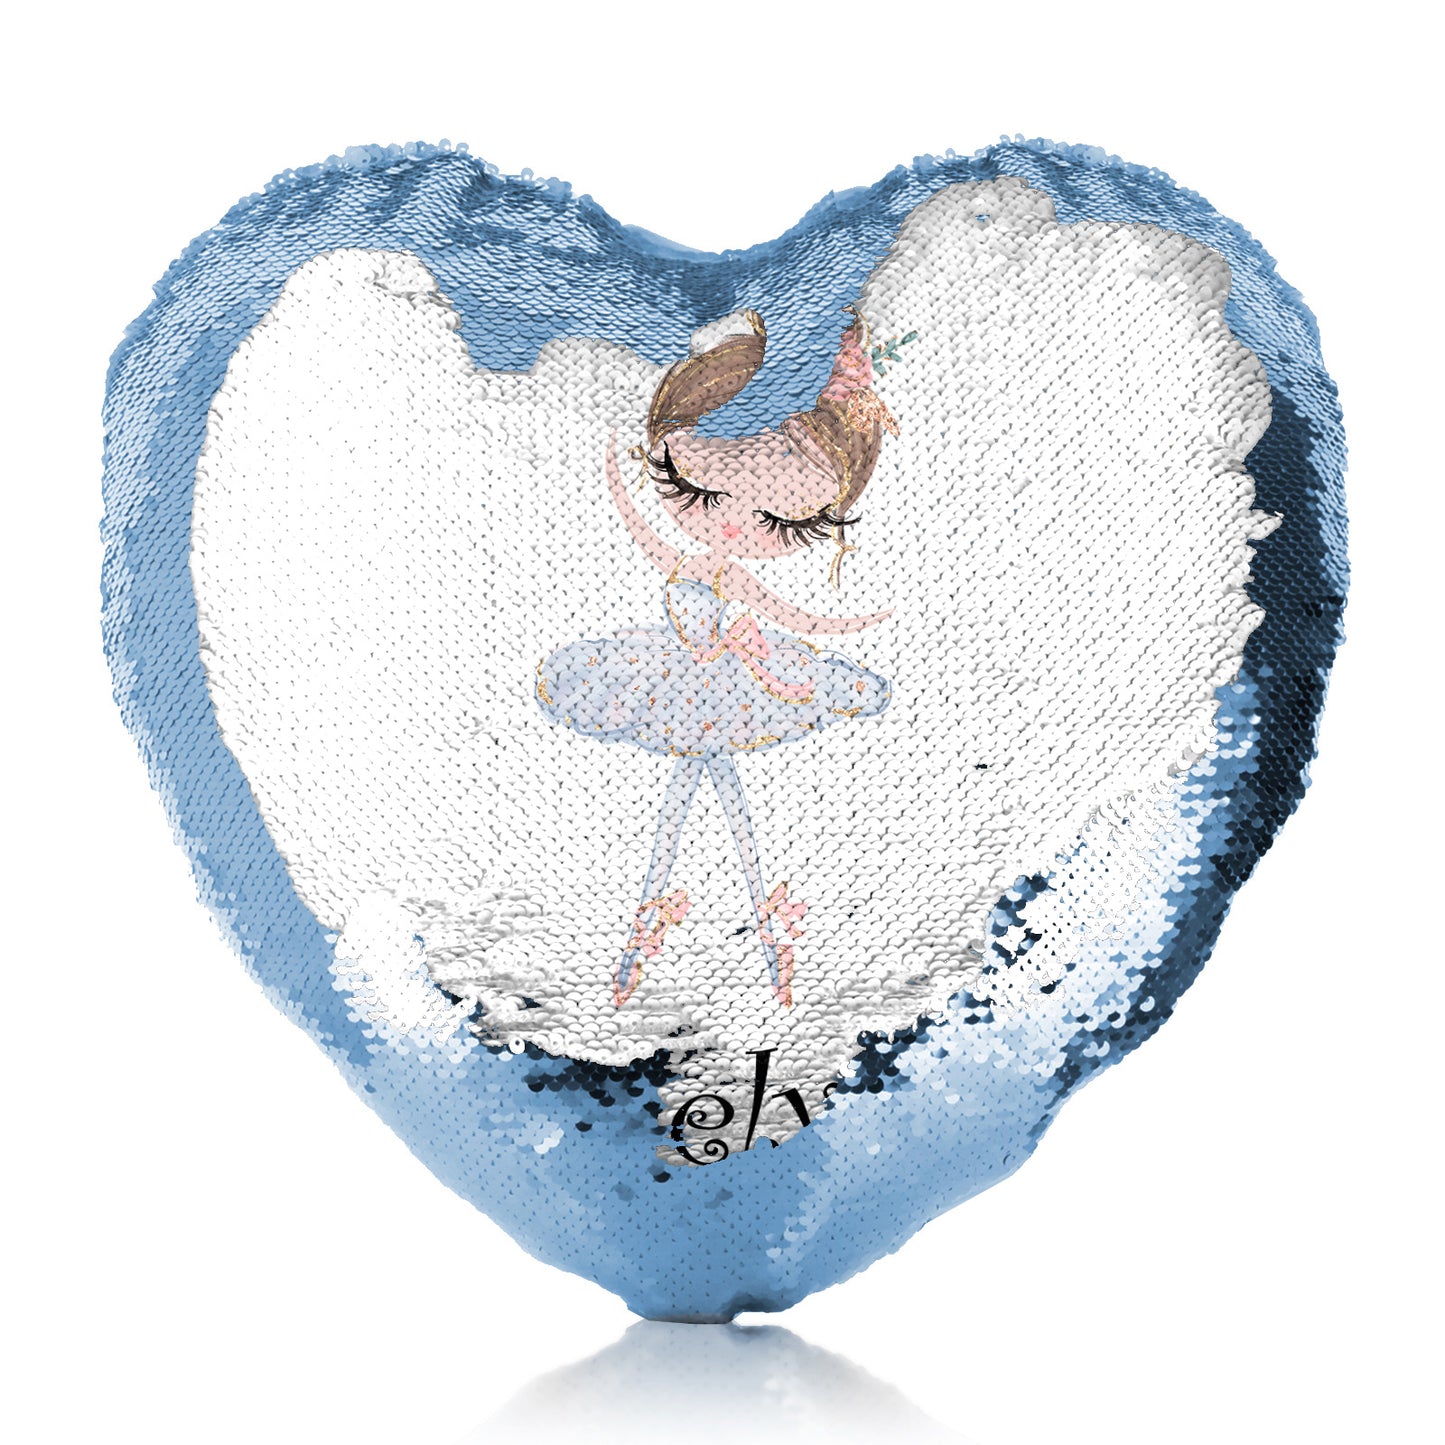 Personalised Sequin Heart Cushion with Cute Text and Light Brown Hair White Dress Ballerina